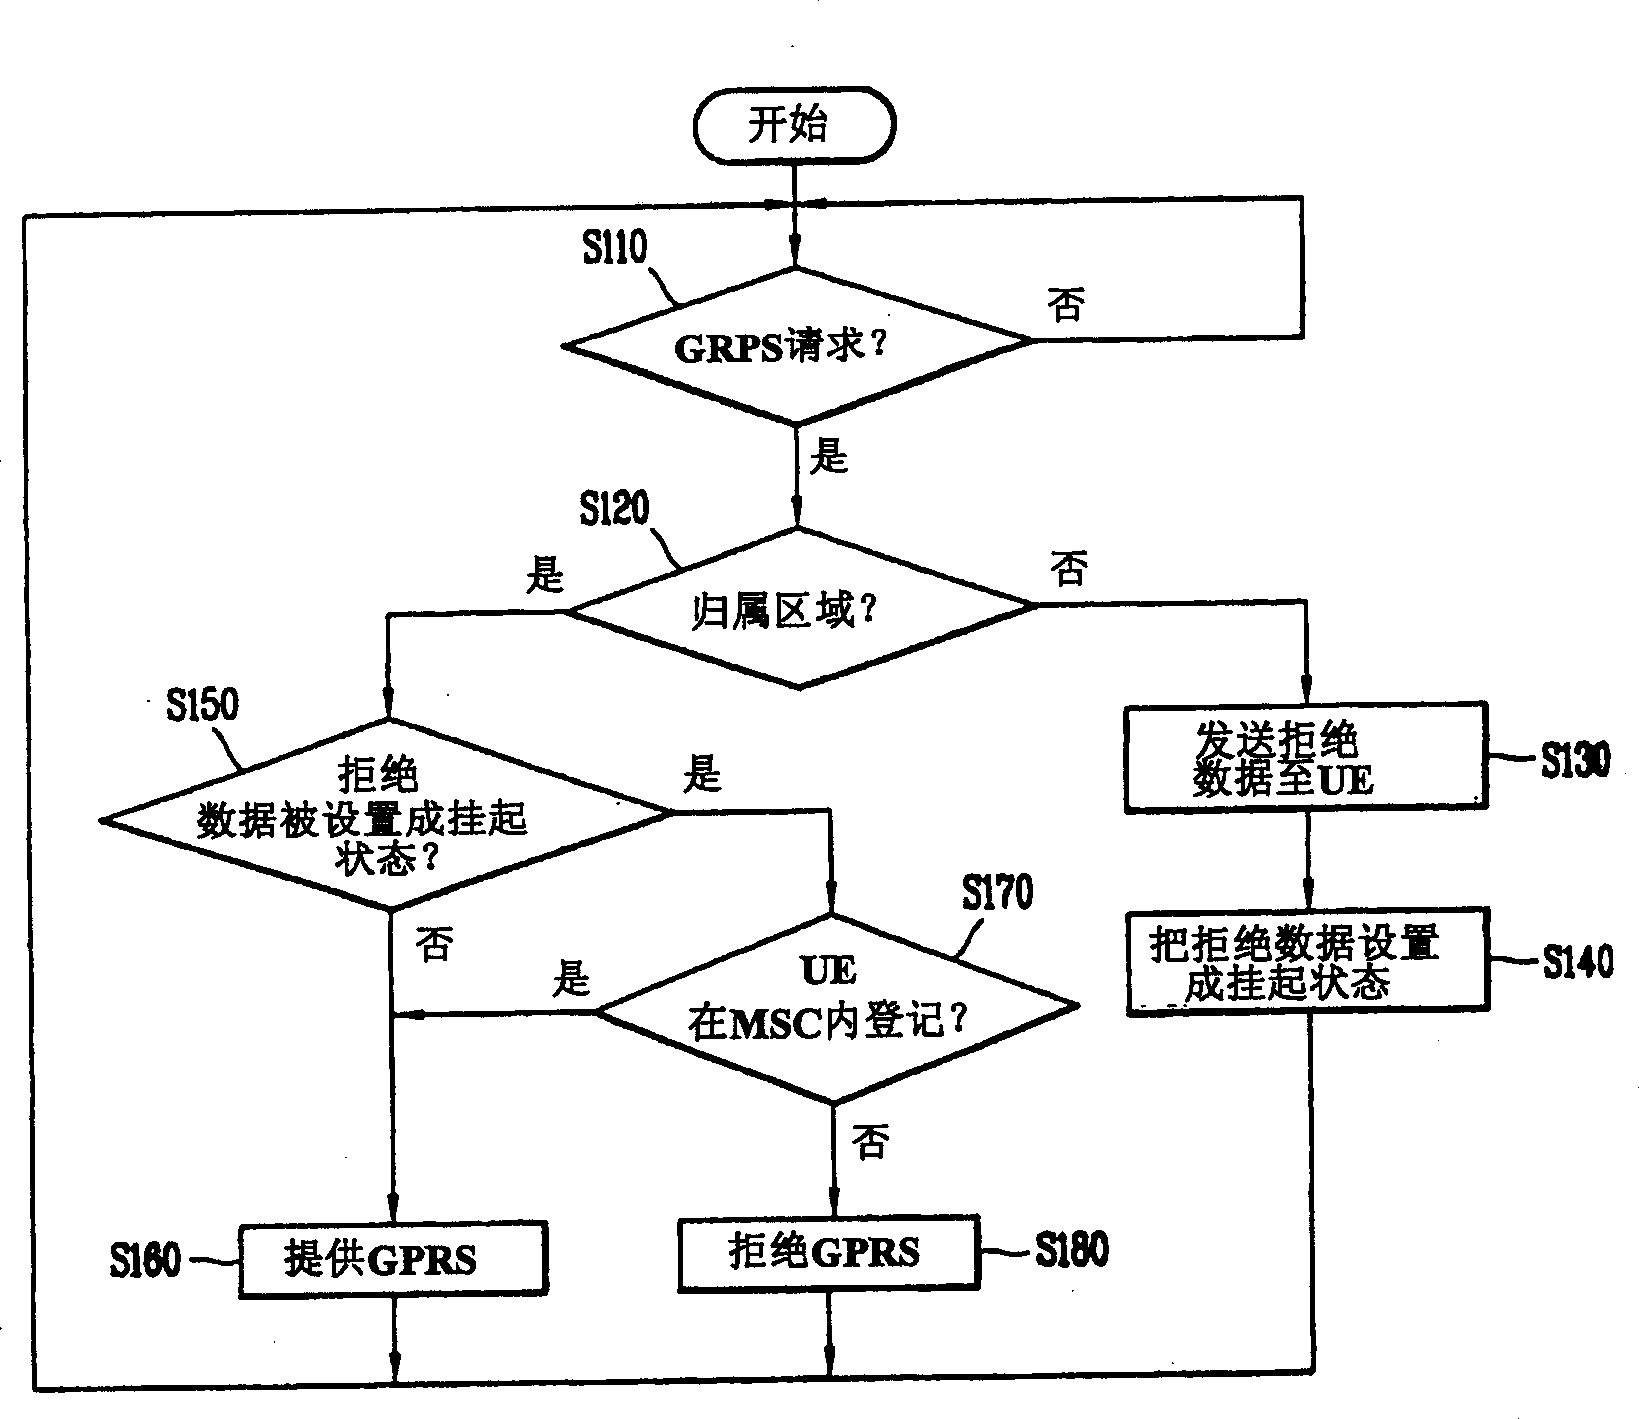 Method for executing data communication business in mobile communication system